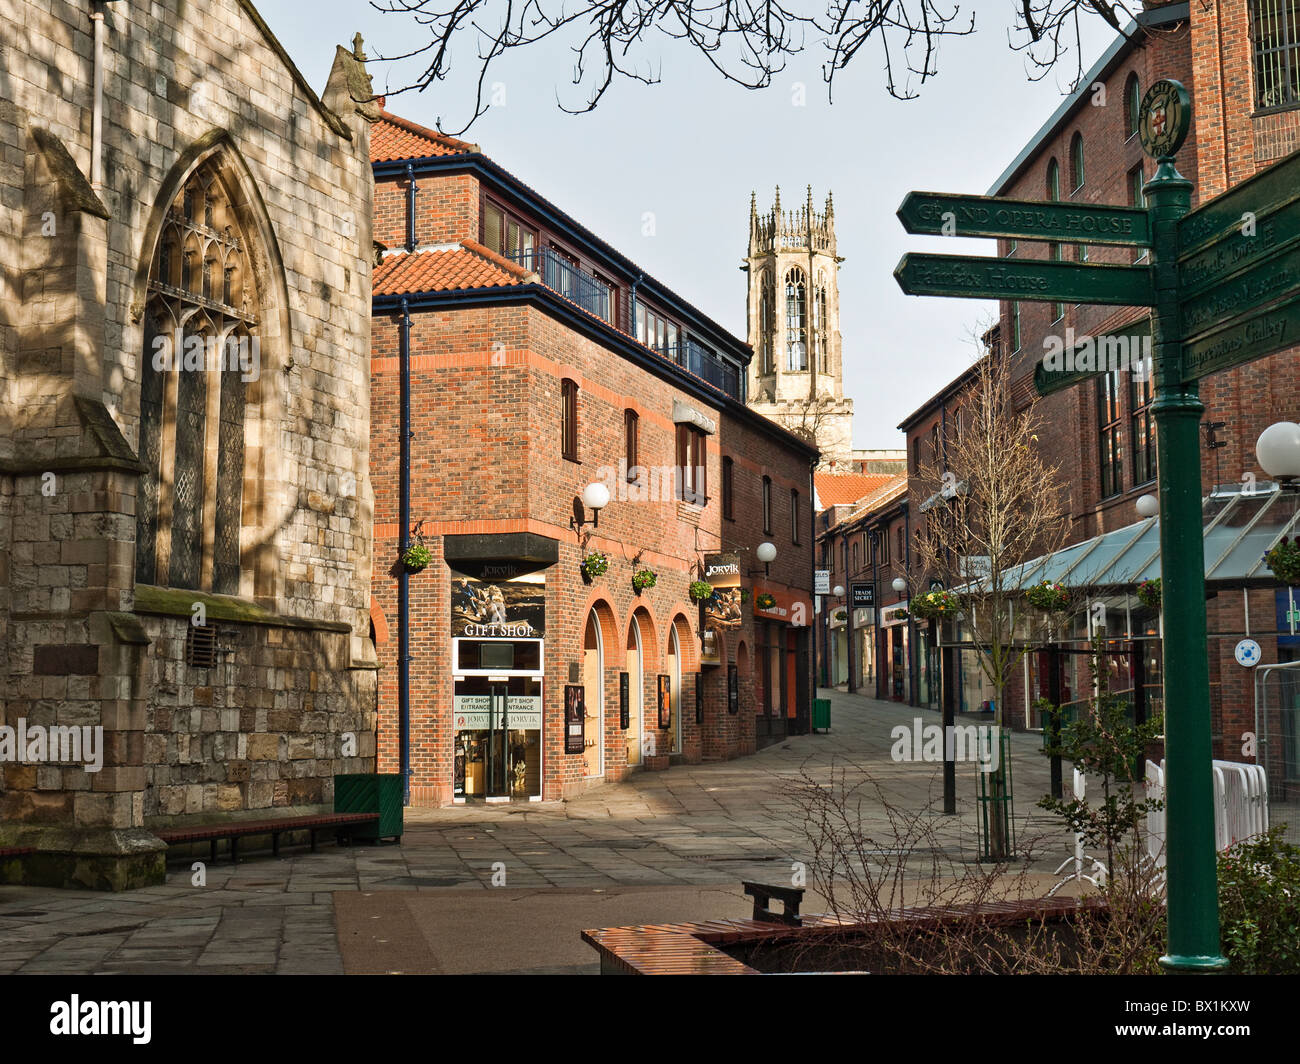 Coppergate Walk with Jorvik viking museum and signpost in early morning winter sunshine, City of York, Yorkshire, UK Stock Photo